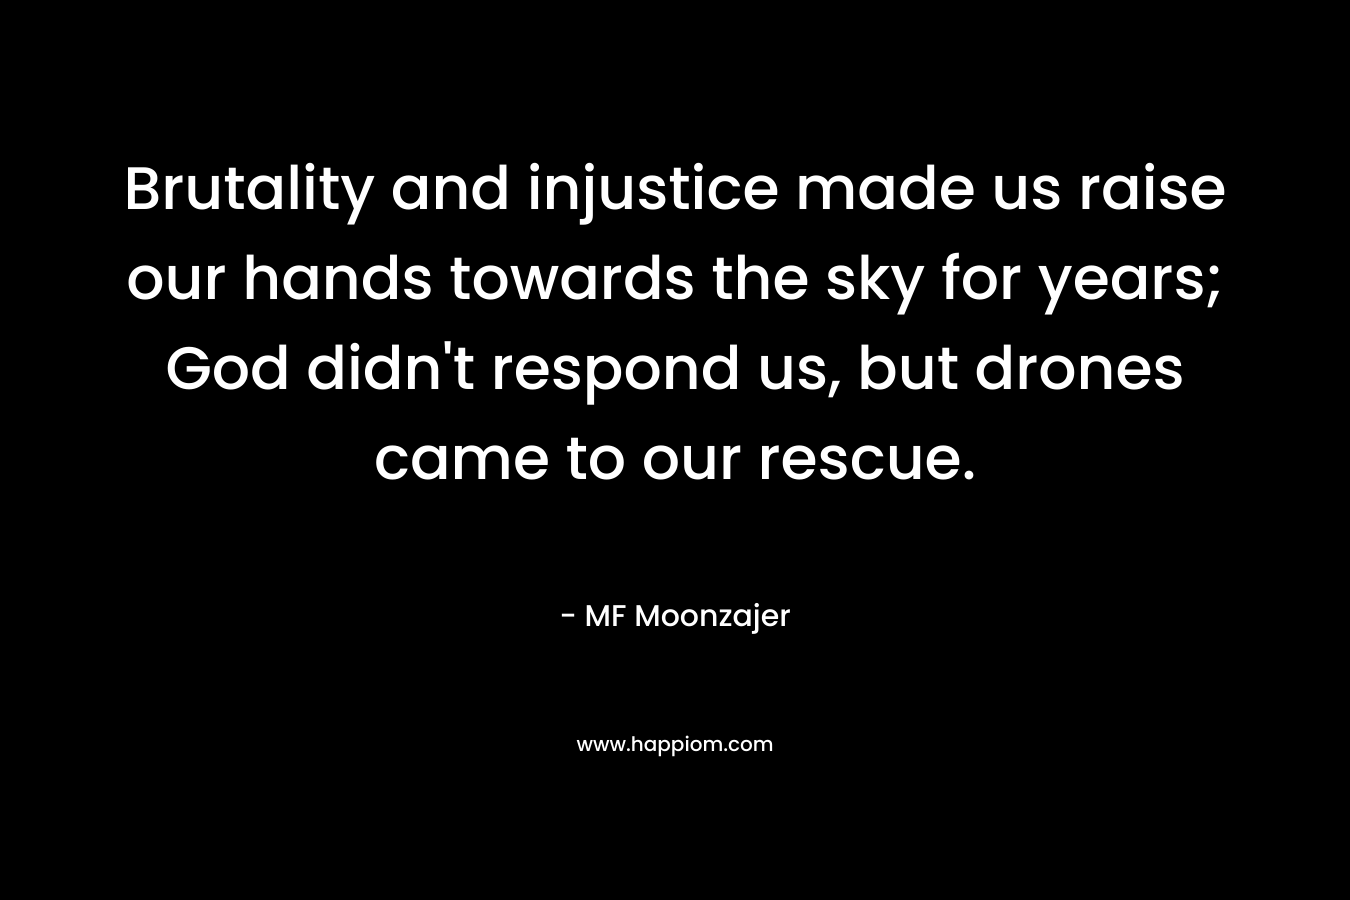 Brutality and injustice made us raise our hands towards the sky for years; God didn't respond us, but drones came to our rescue.